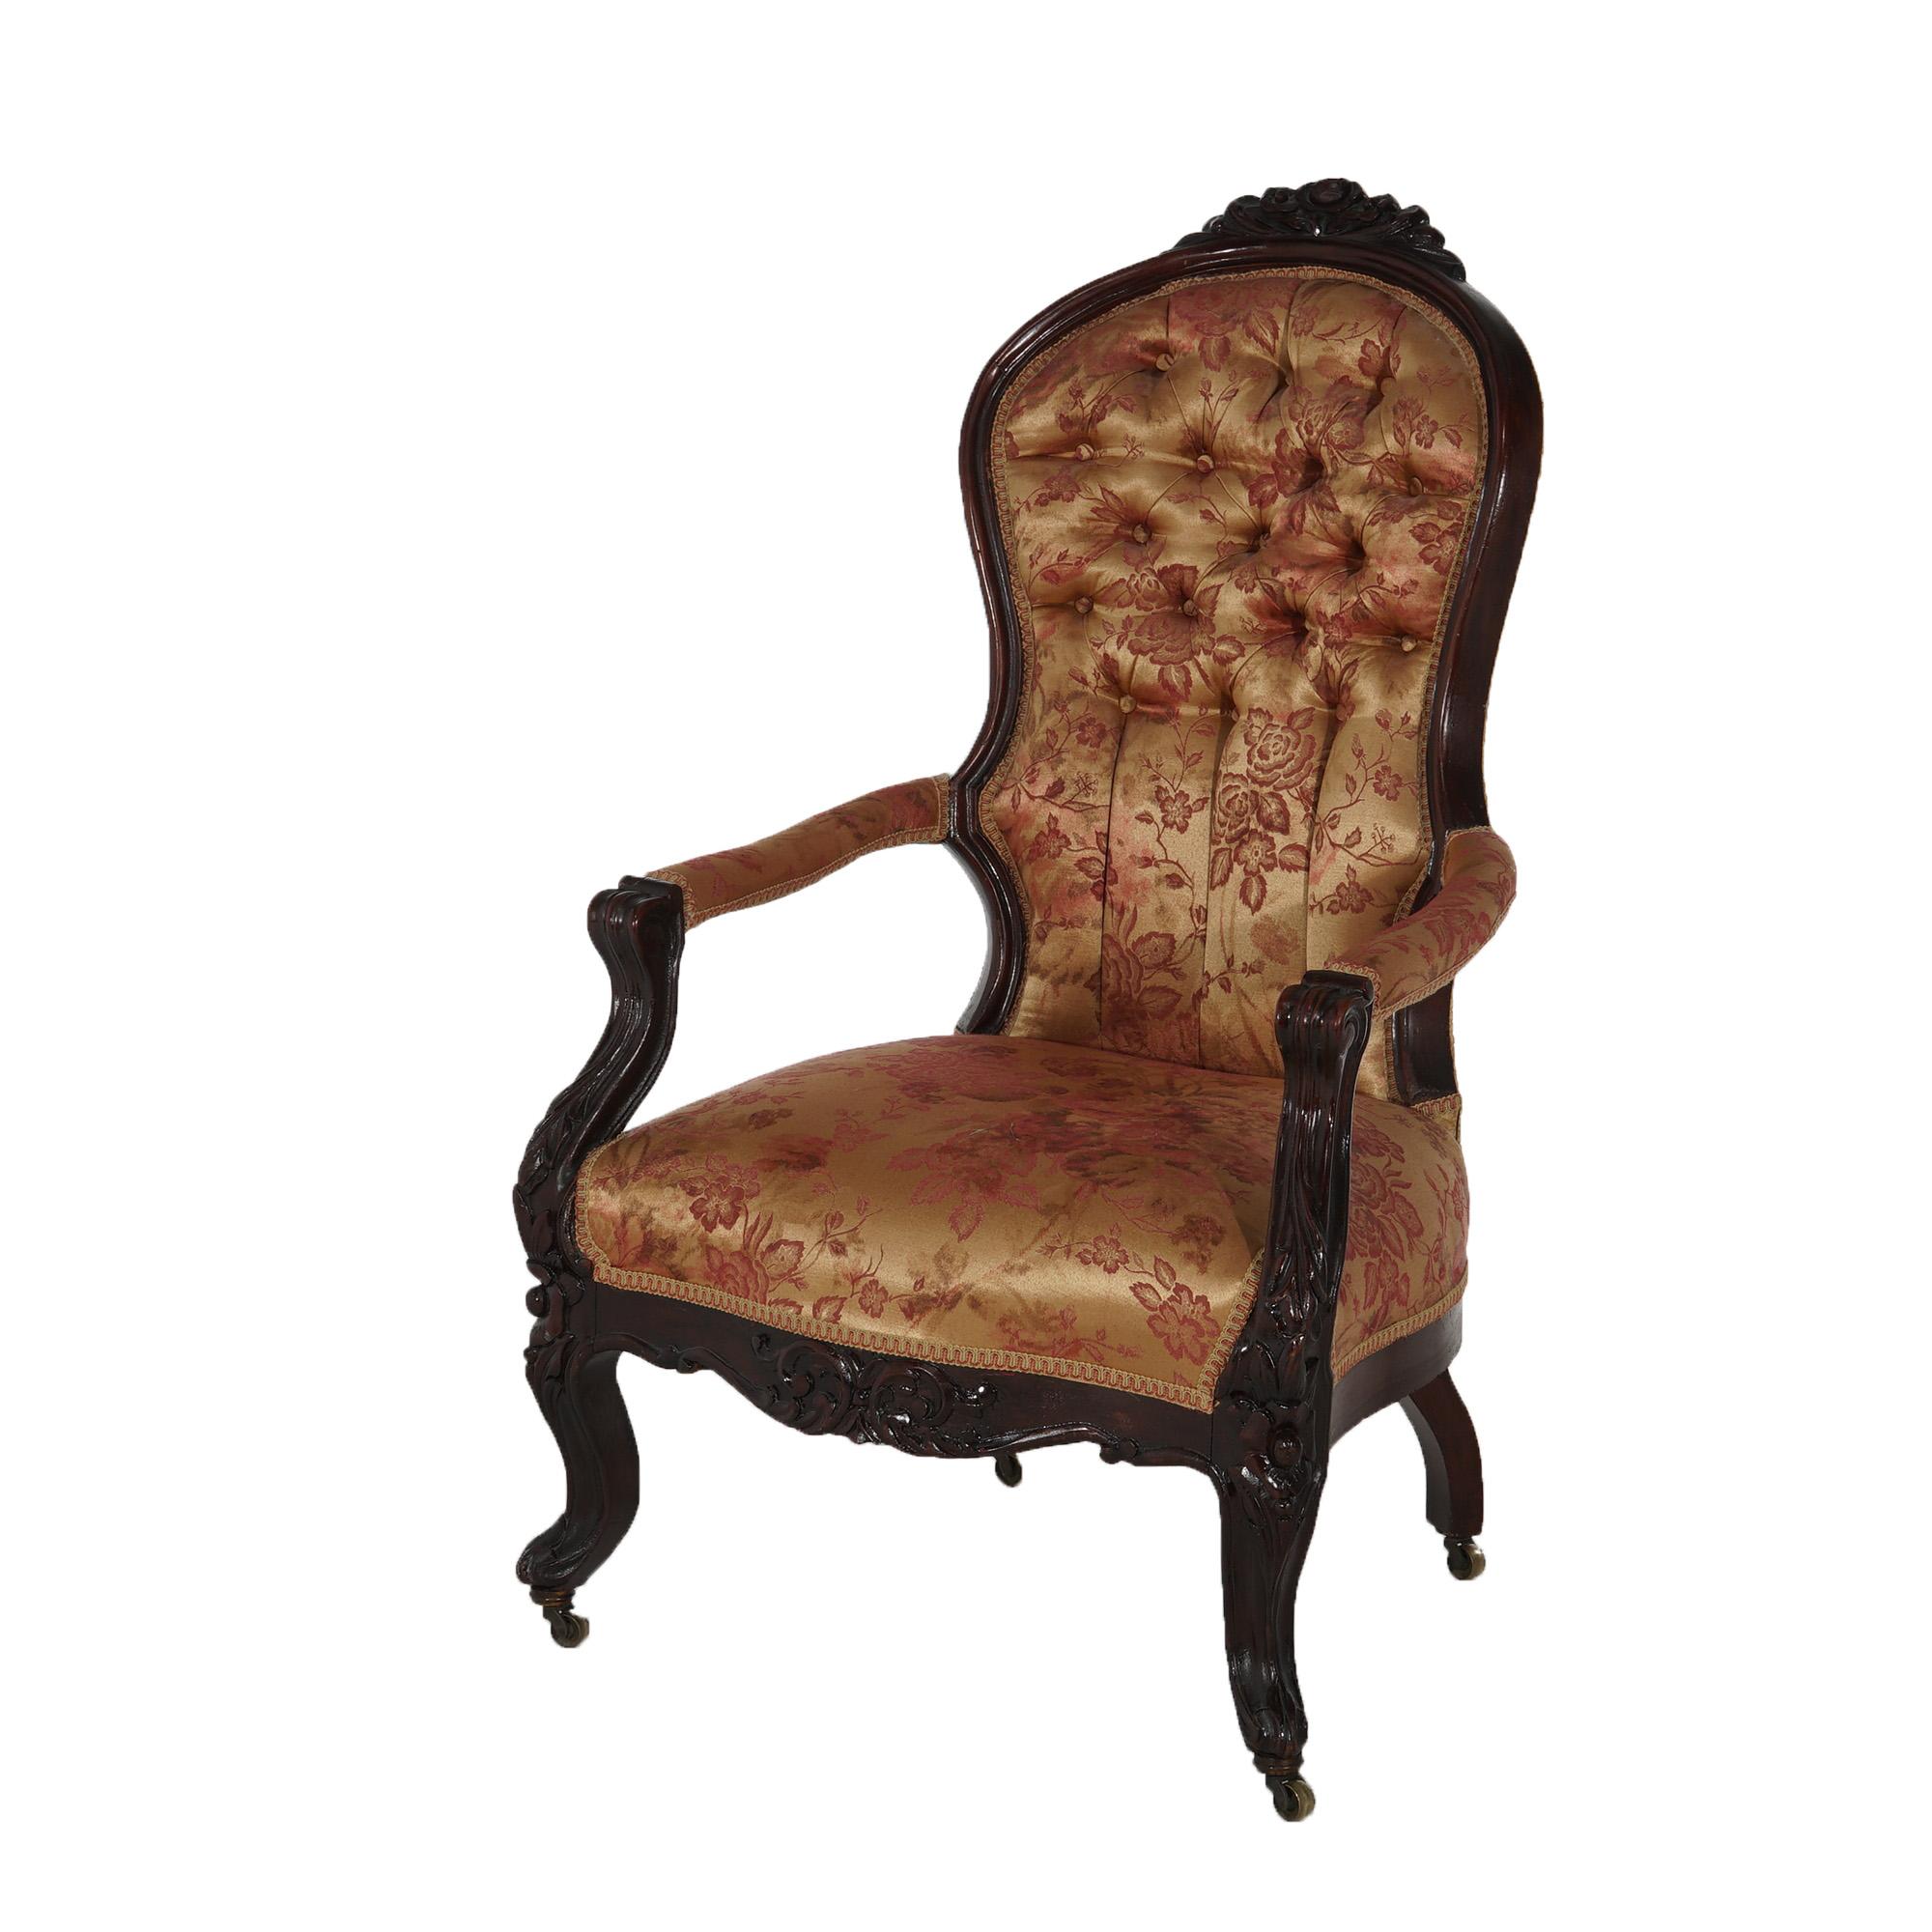 Antique Victorian Carved Walnut Upholstered Button-Back Gentleman’s Chair C1890 In Good Condition For Sale In Big Flats, NY